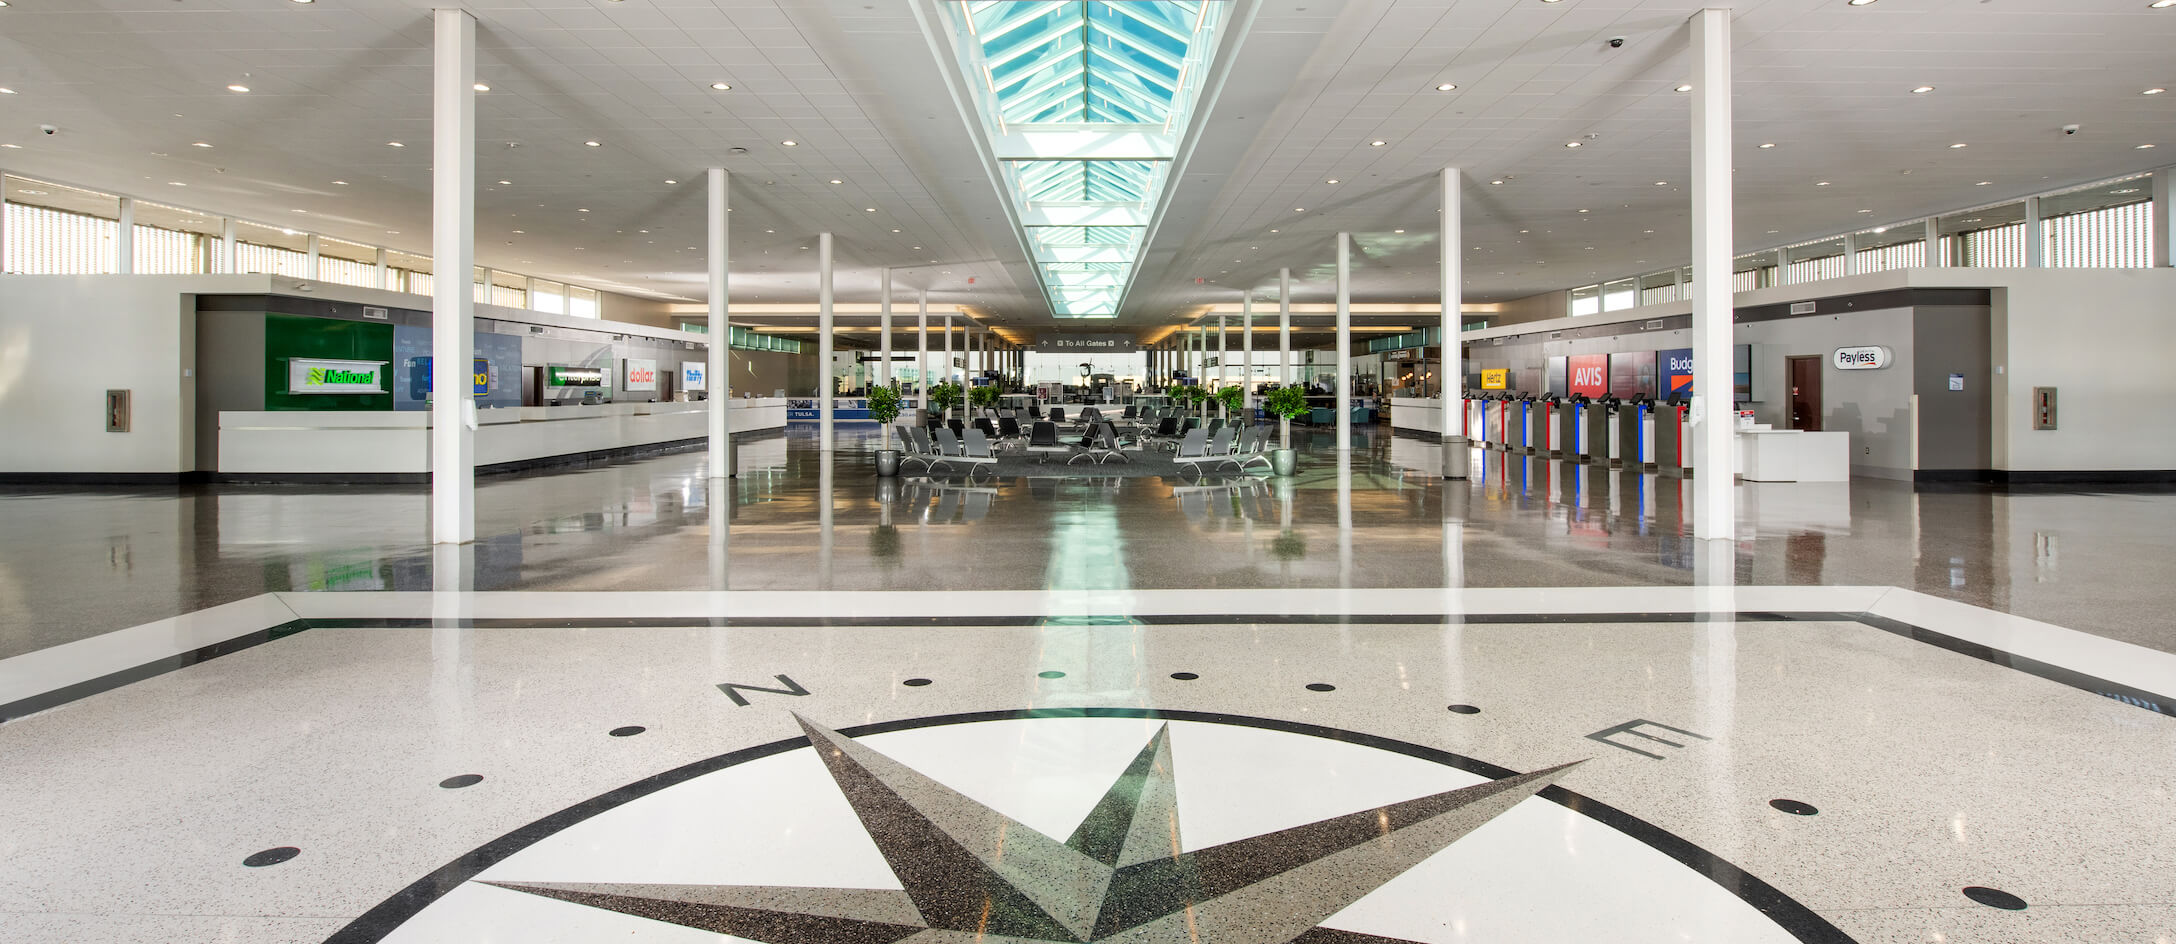 Tulsa International Airport issues call for proposals for public art. Deadline to apply is June 2.